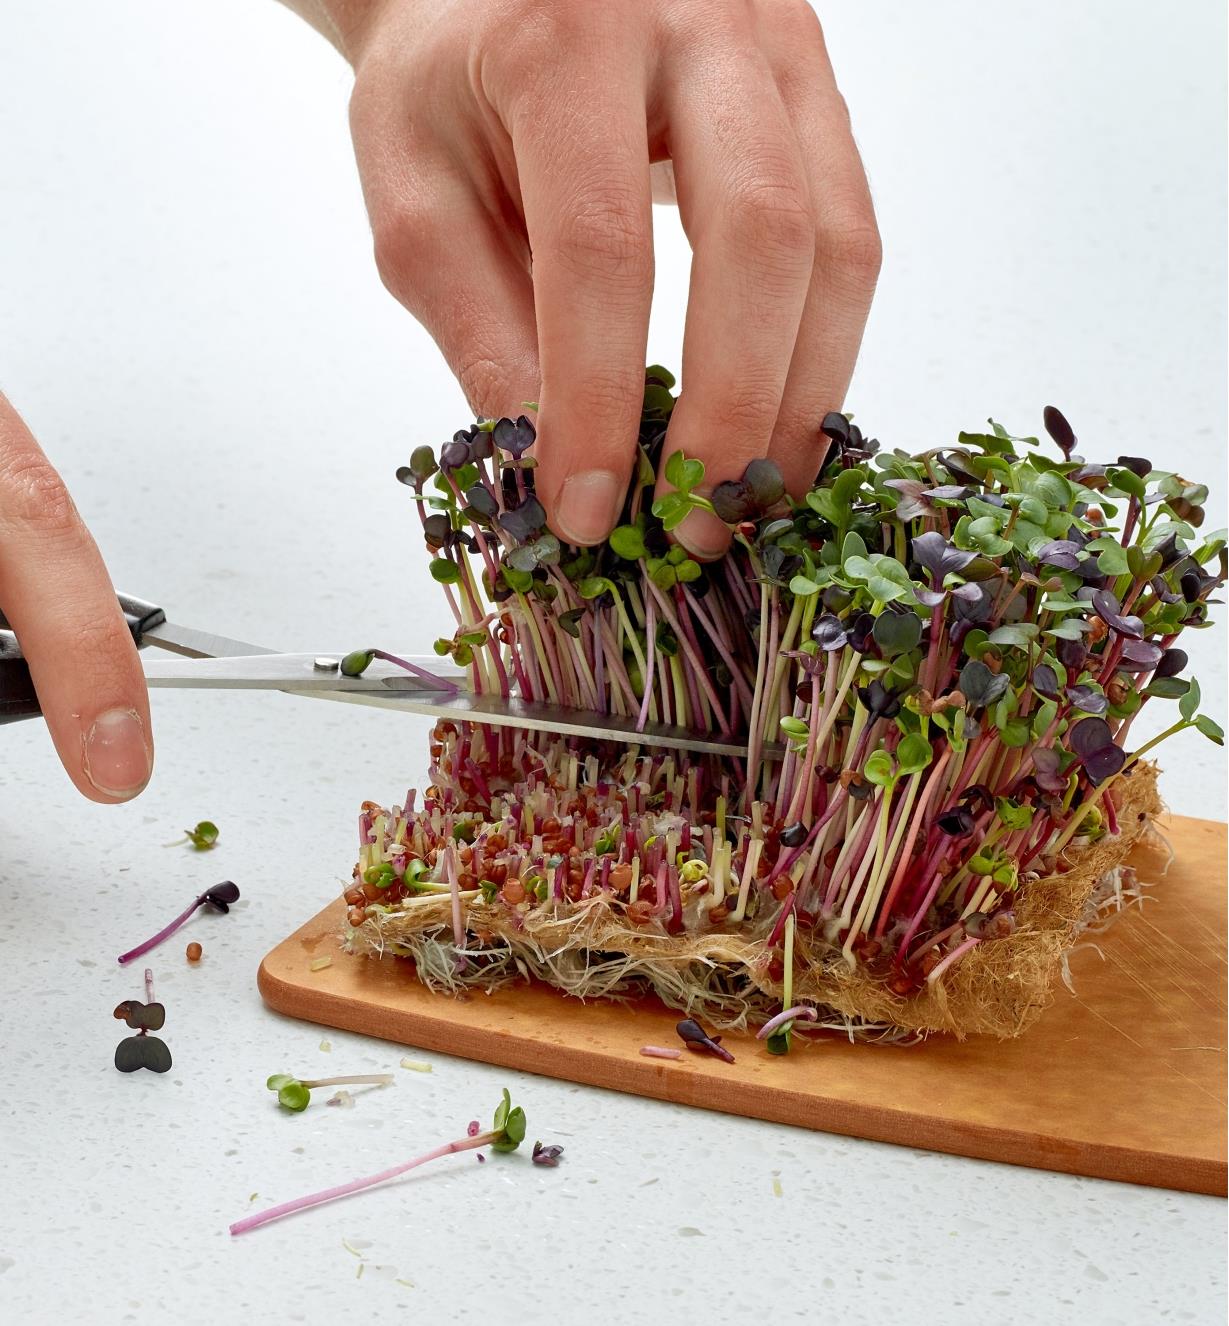 Cutting sprouts on a hemp-fiber grow mat with a pair of scissors